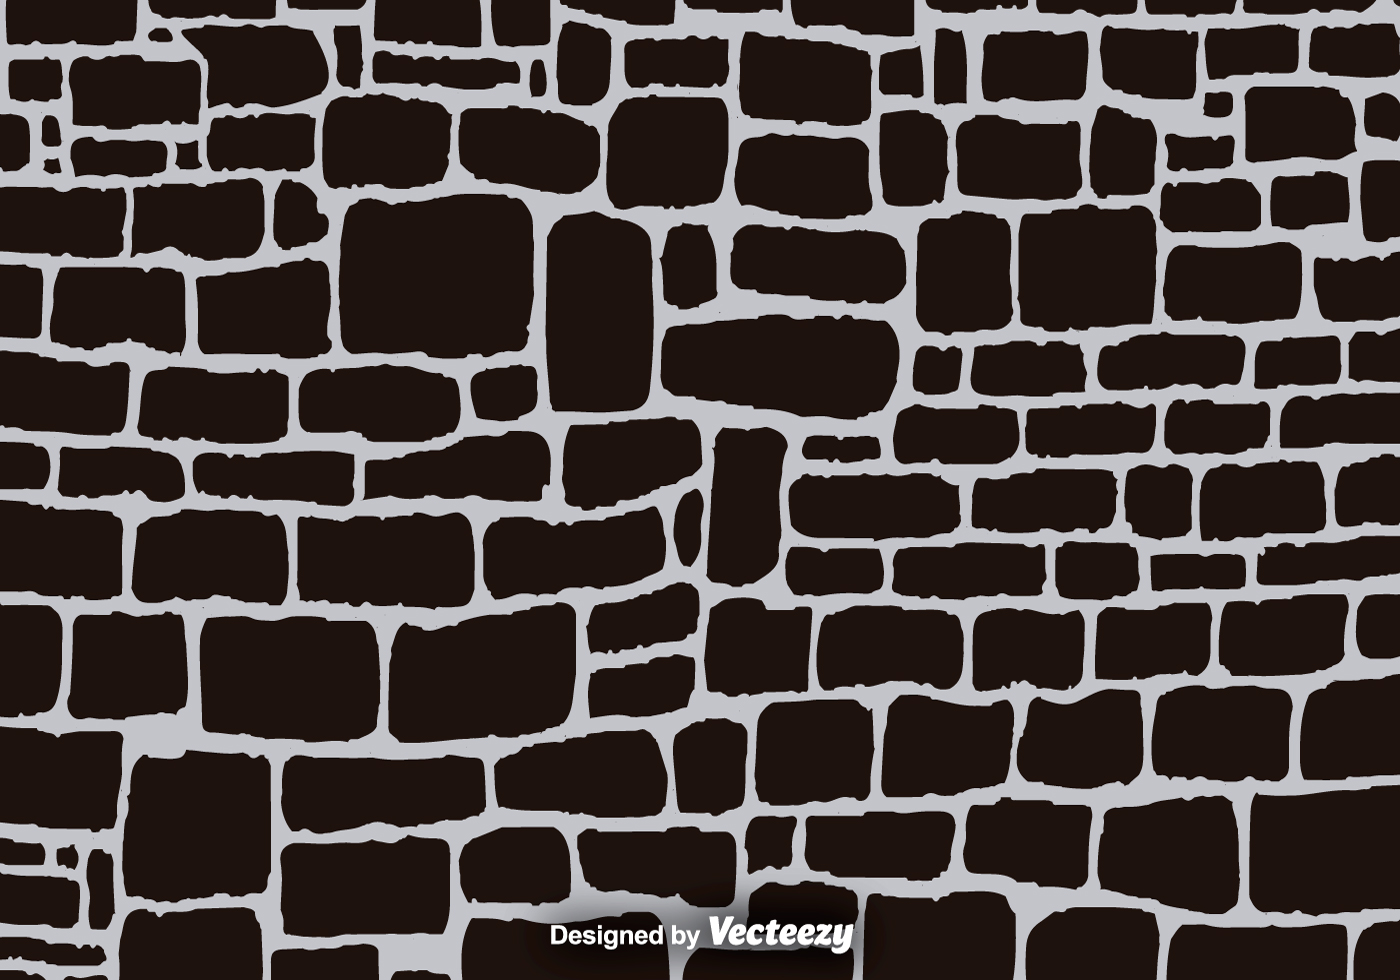 Stone wall texture clipart - Clipground